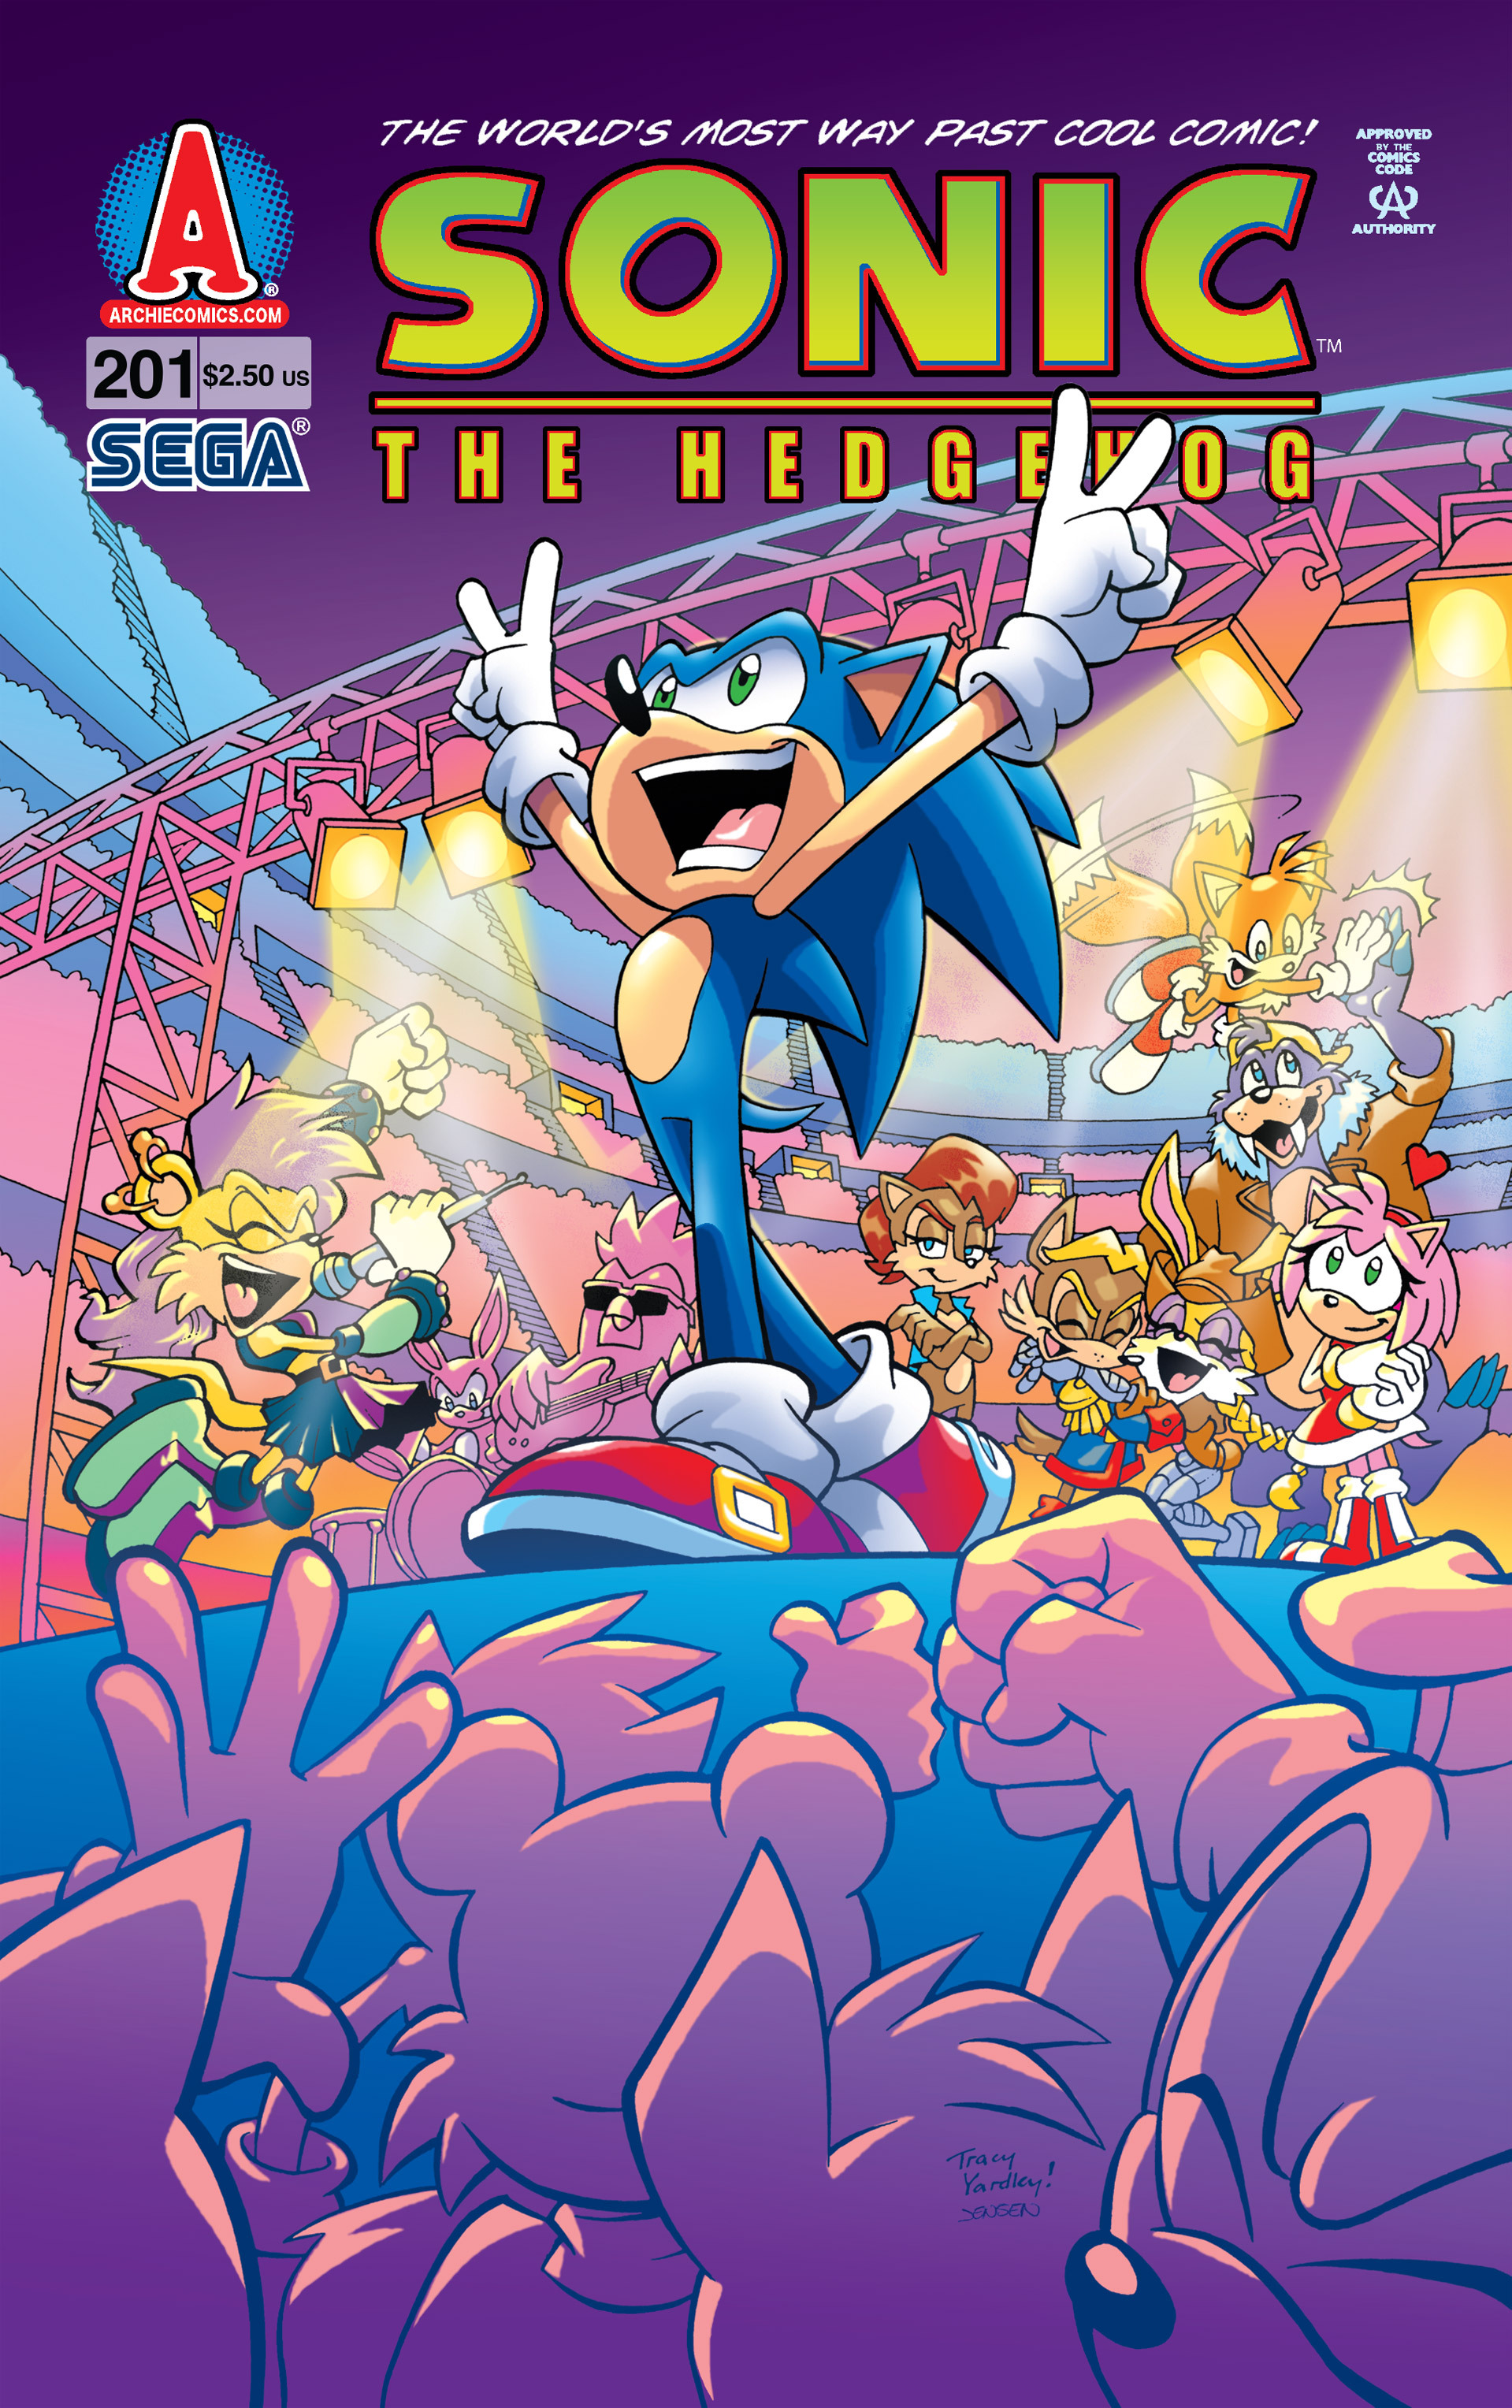 Archie Sonic the Hedgehog Issue 201 | Sonic News Network | Fandom powered by Wikia